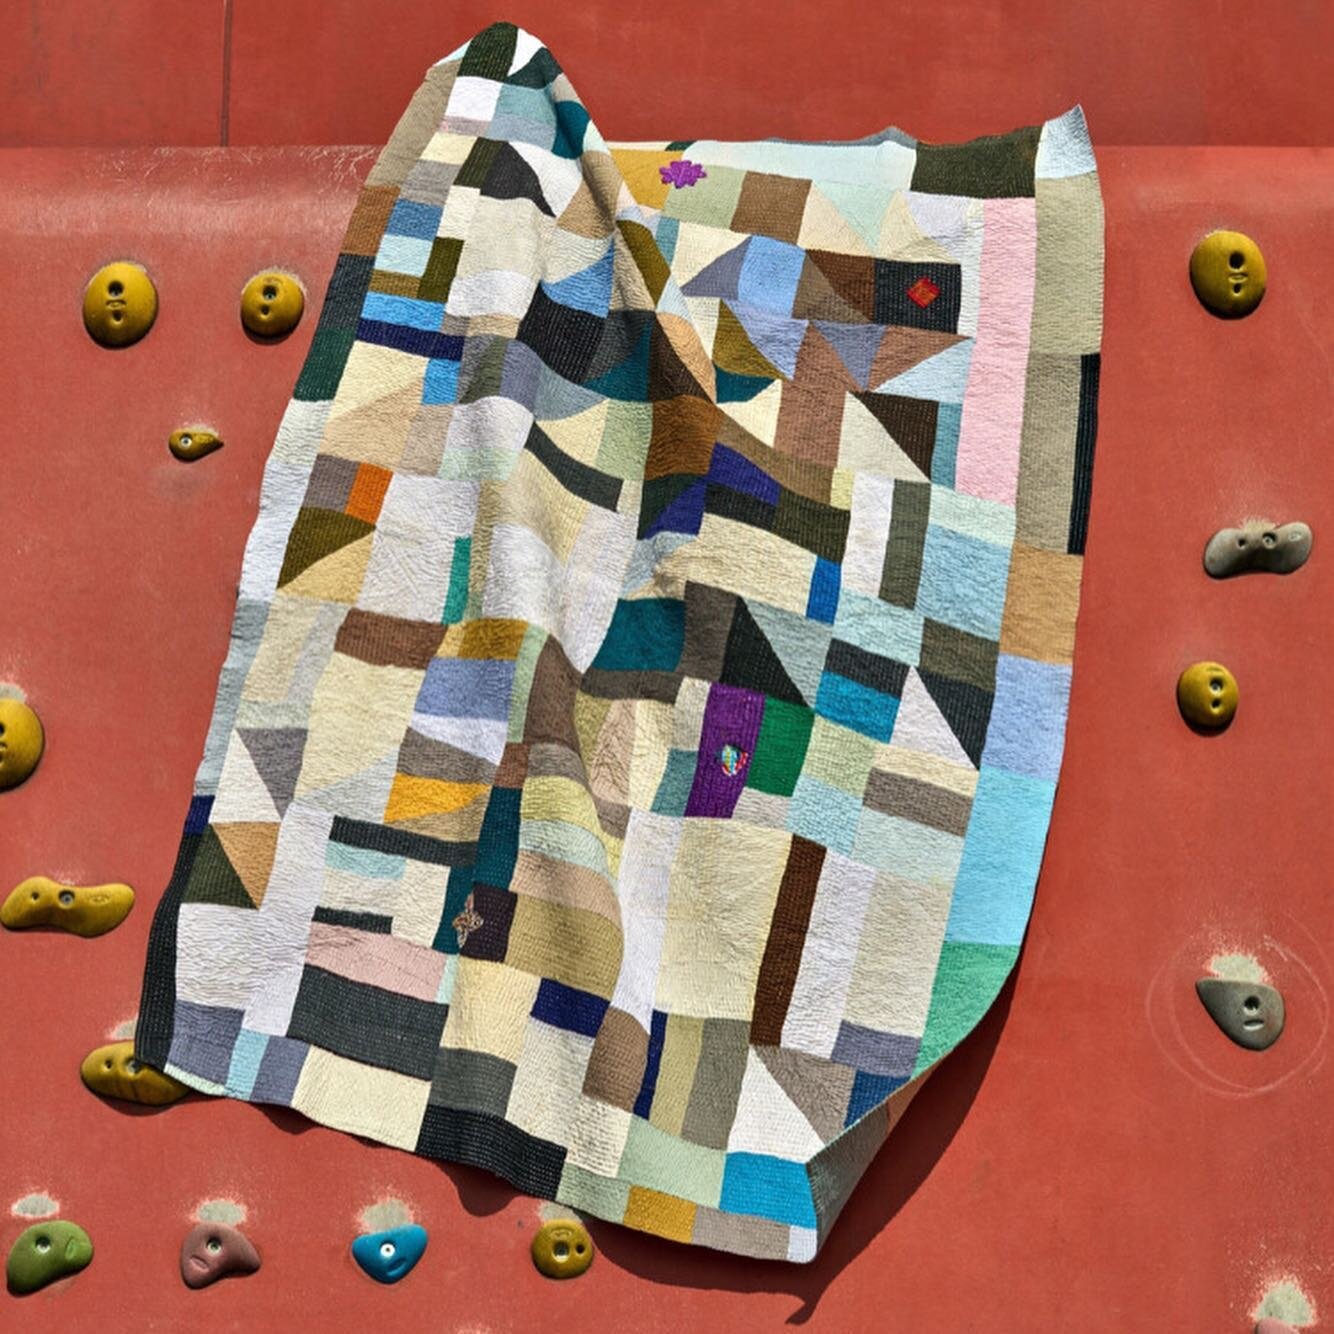 A couple of weeks ago, we had a great day at the Olympic Park in East London, photographing our new micro-collection of one-off art quilts made by our quilt makers in Gujarat, India. We wanted to shine a light on the superb design and craft skills of